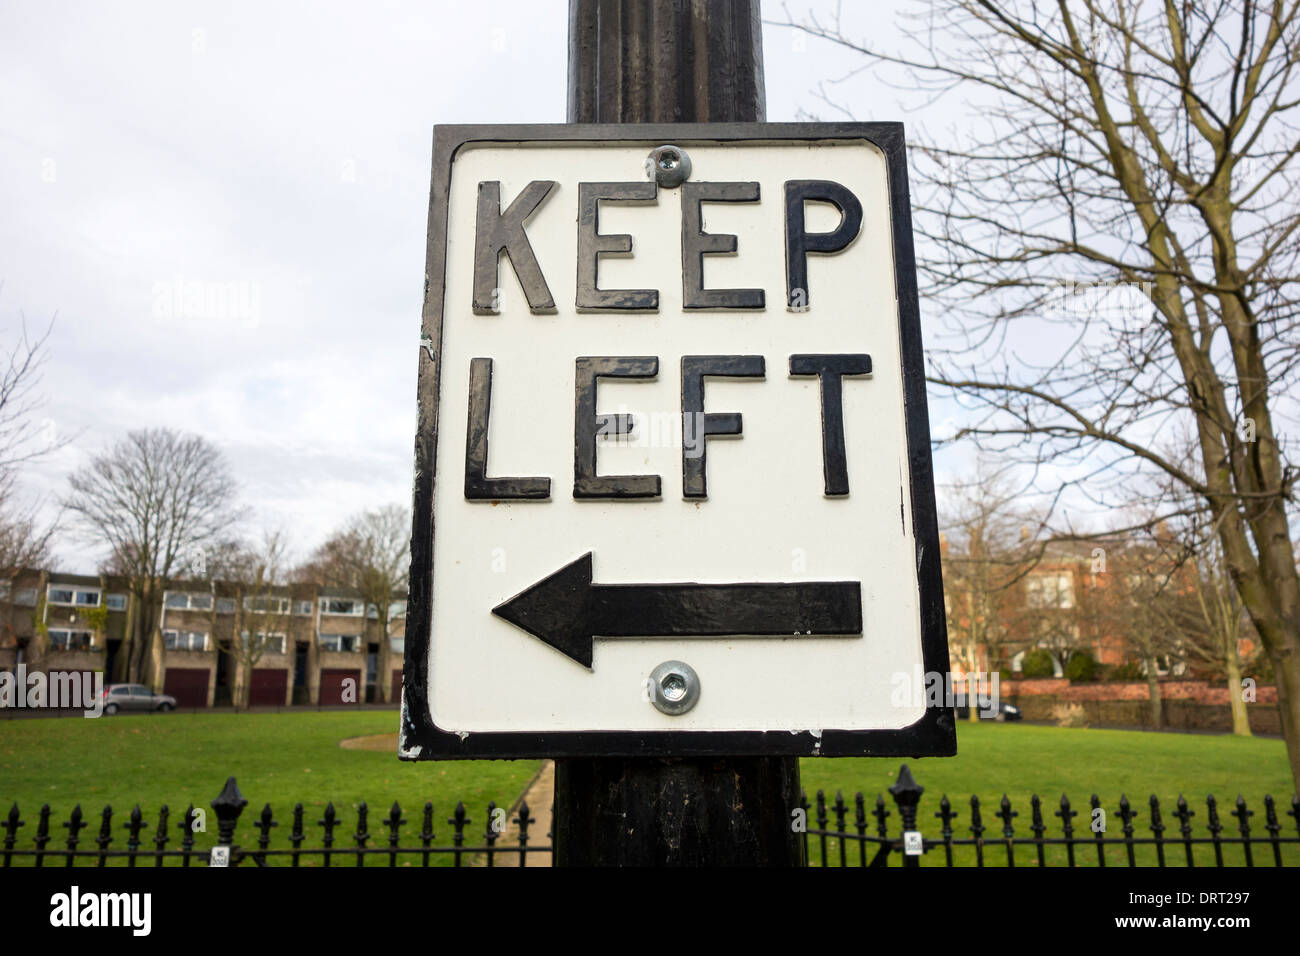 A keep left road sign in the U.K. Stock Photo